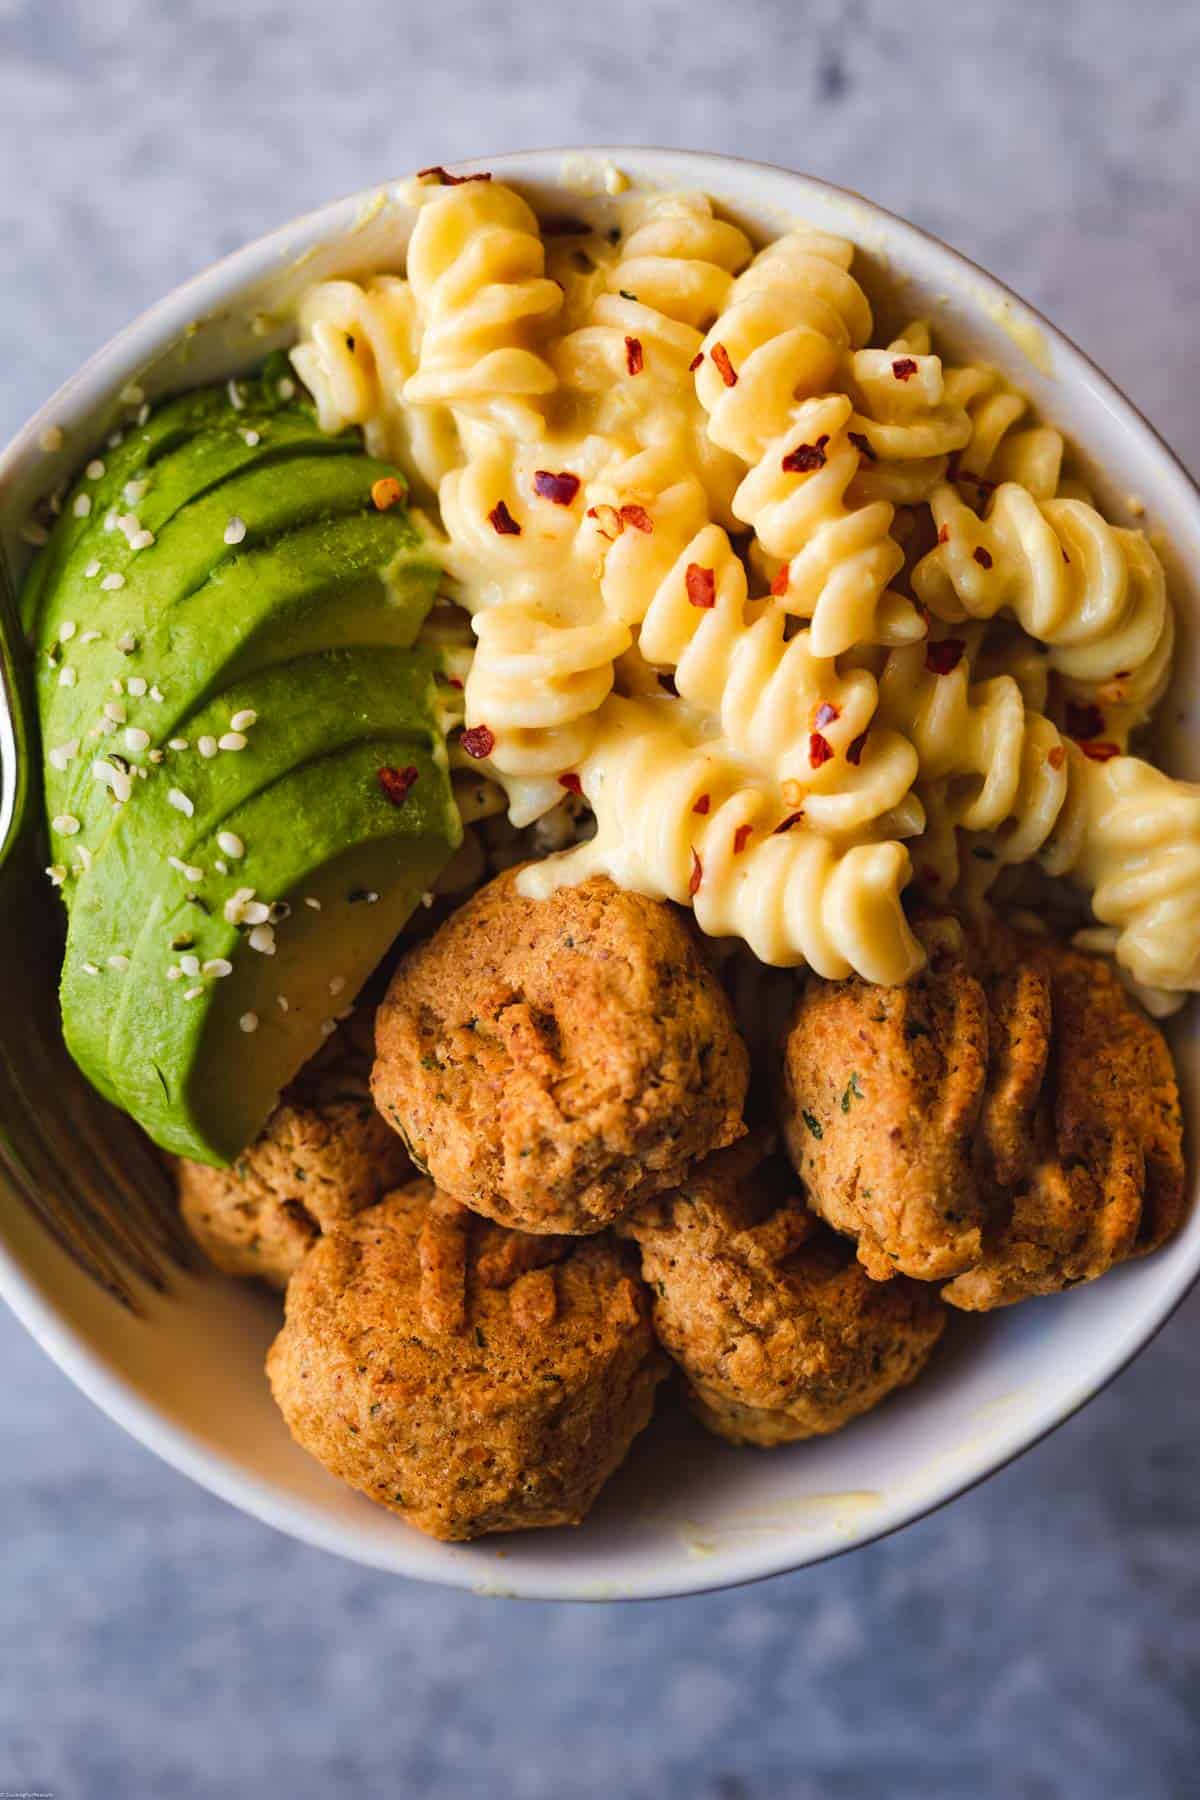 Five golden brown chickpea patties, vegan cheesy pasta, and sliced avocado topped with crushed red pepper in a bowl.